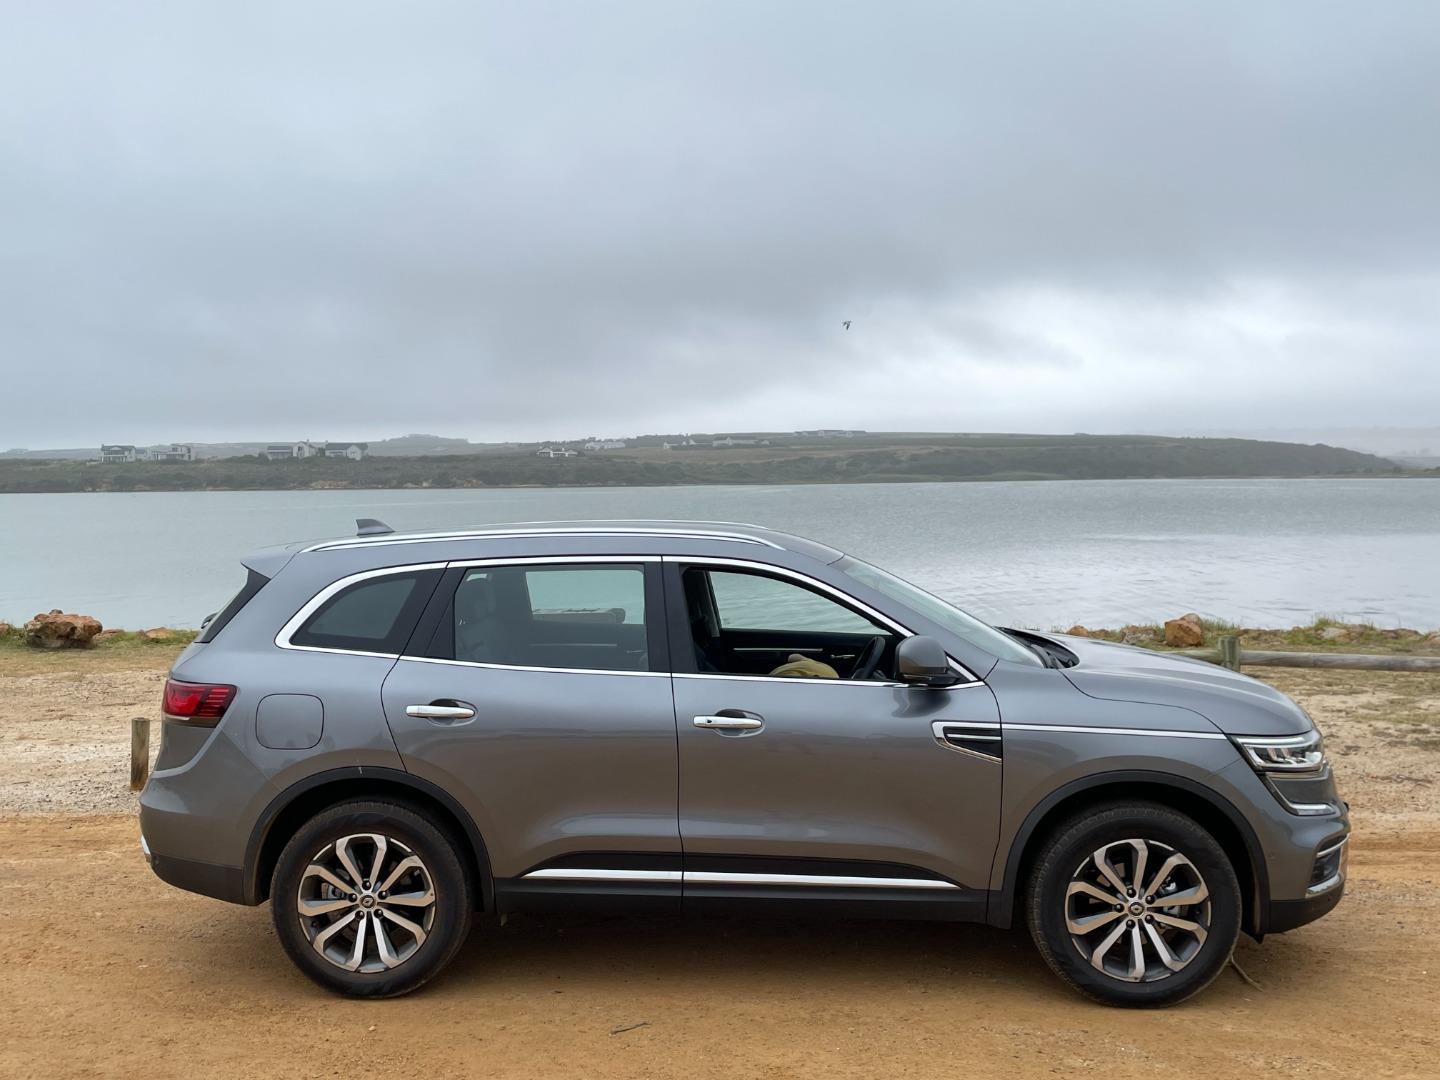 is the renault koleos good for families?